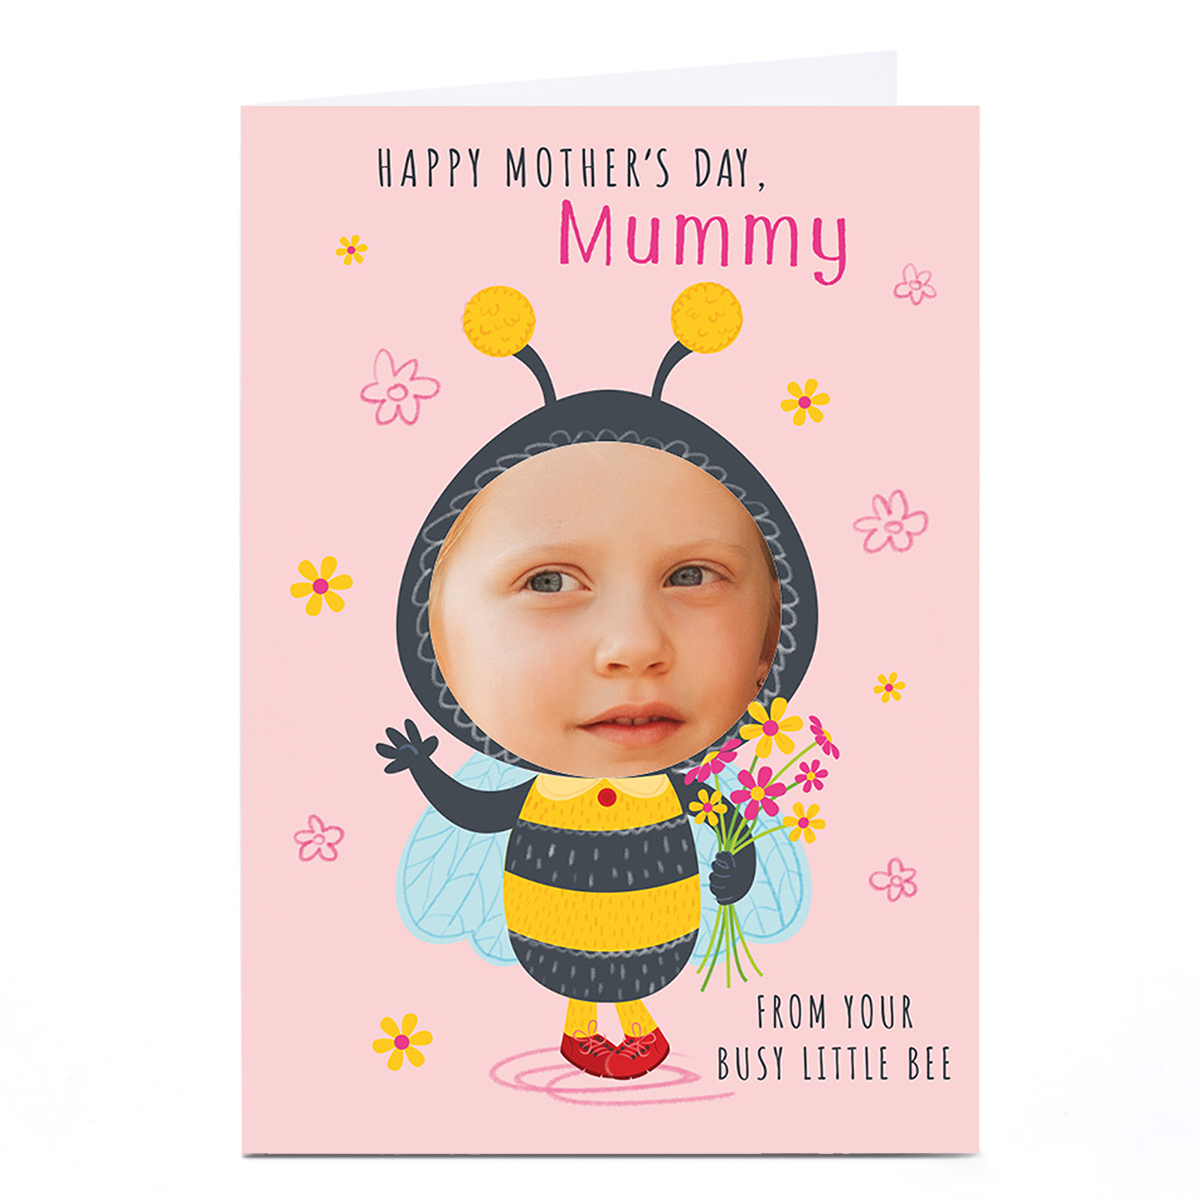 Photo Dalia Clark Mother's Day Card - Busy Little Bee, Mummy Pink